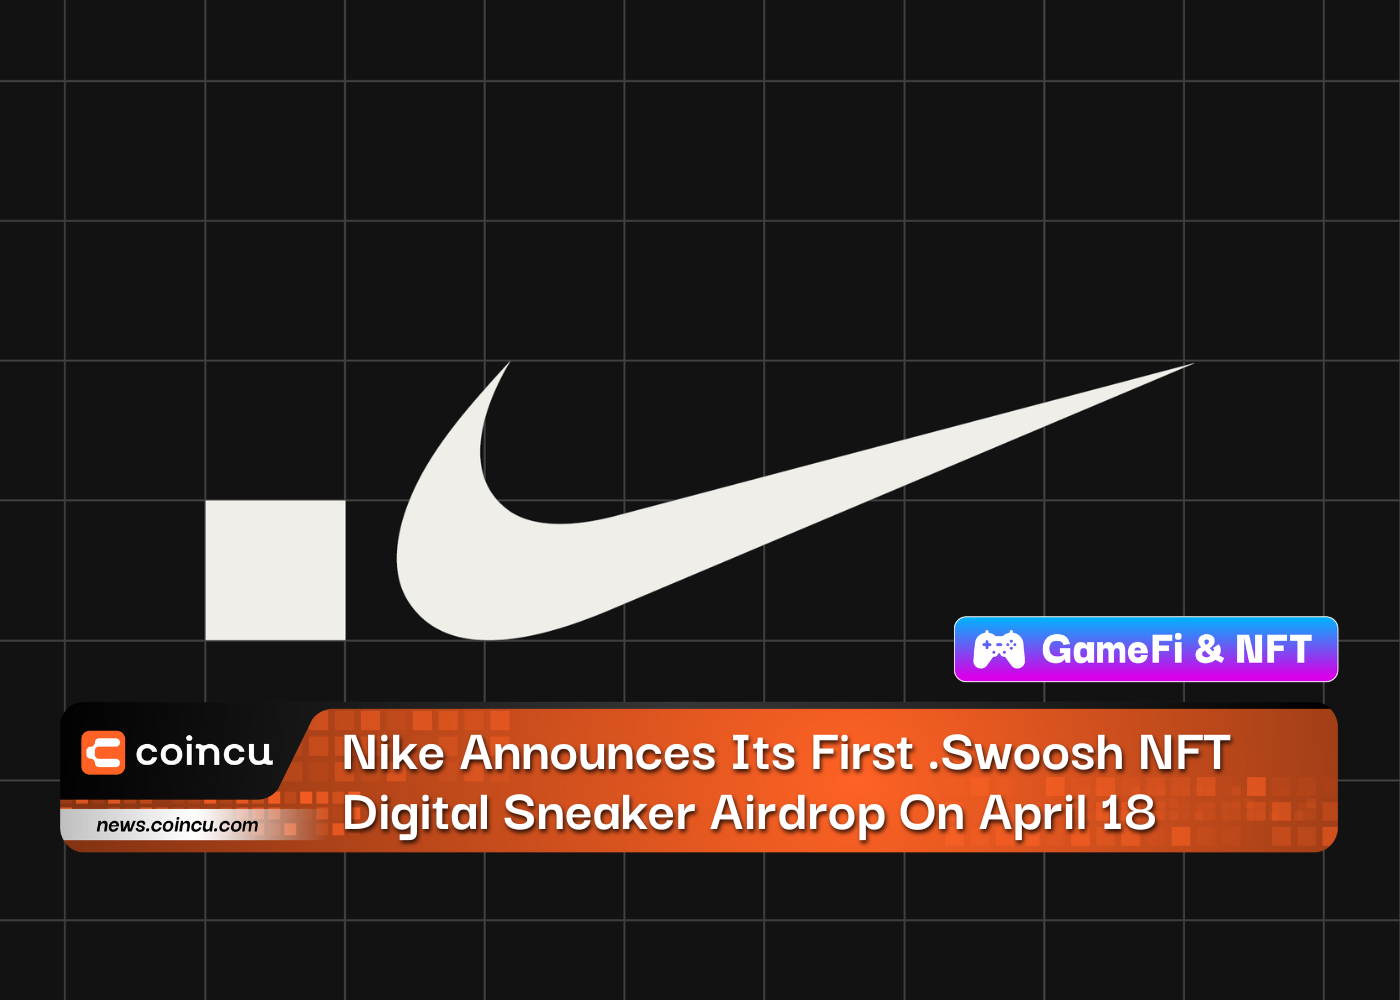 Nike Announces Its First .Swoosh NFT Digital Sneaker Airdrop On April 18